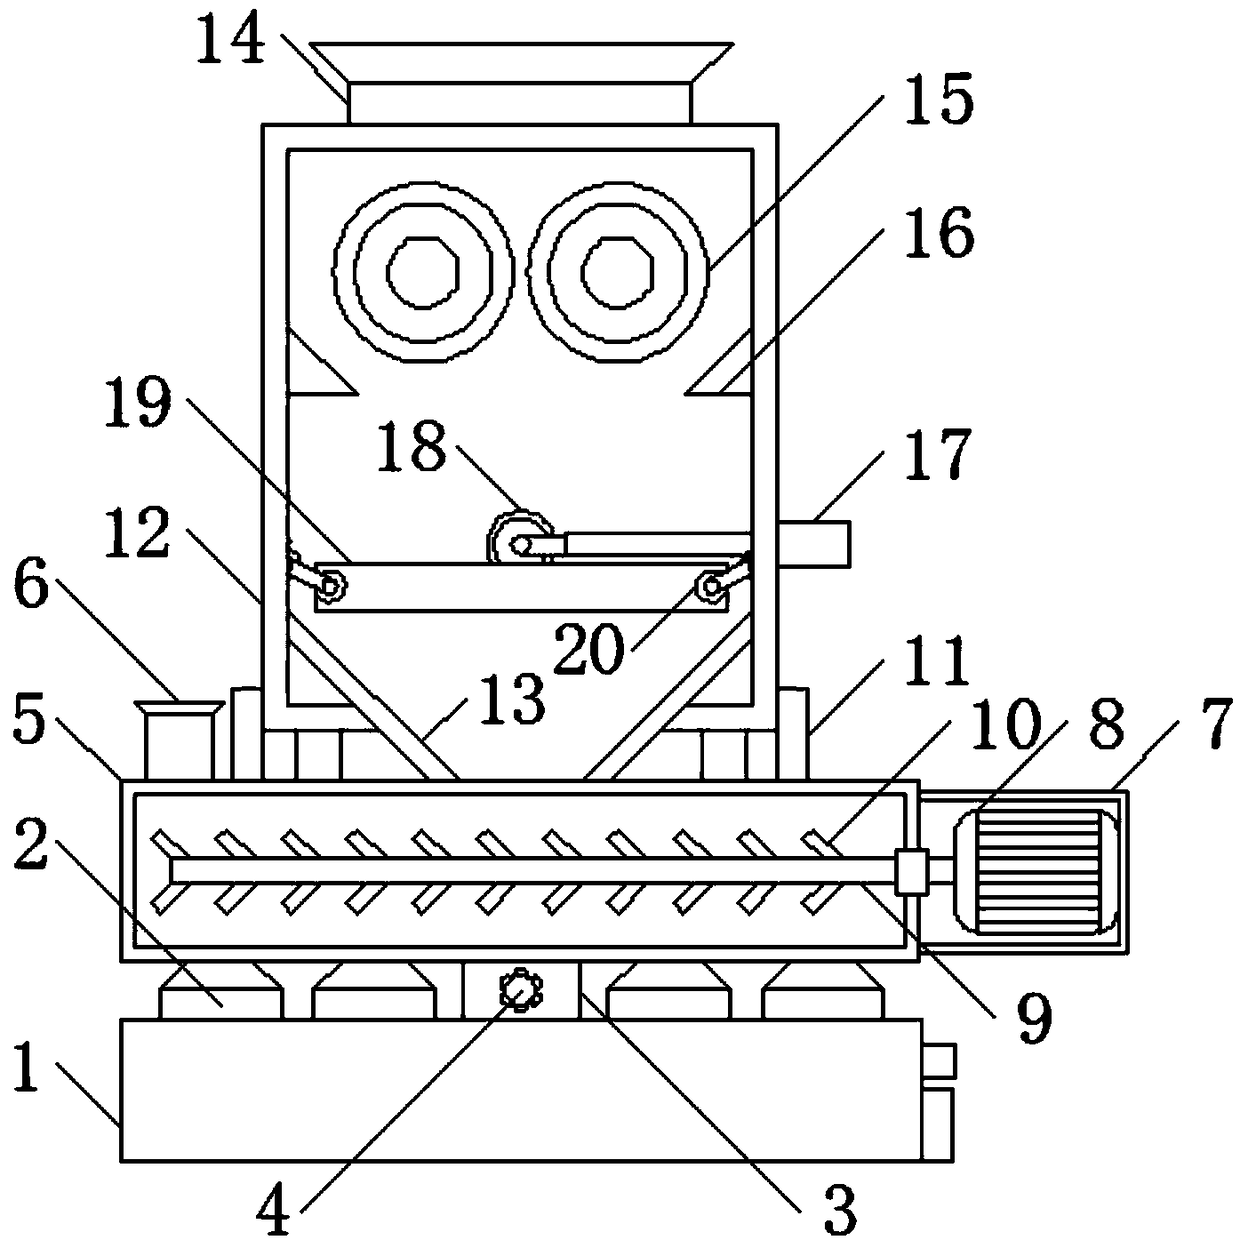 Recovery processing device for producing polyether polyol and using method